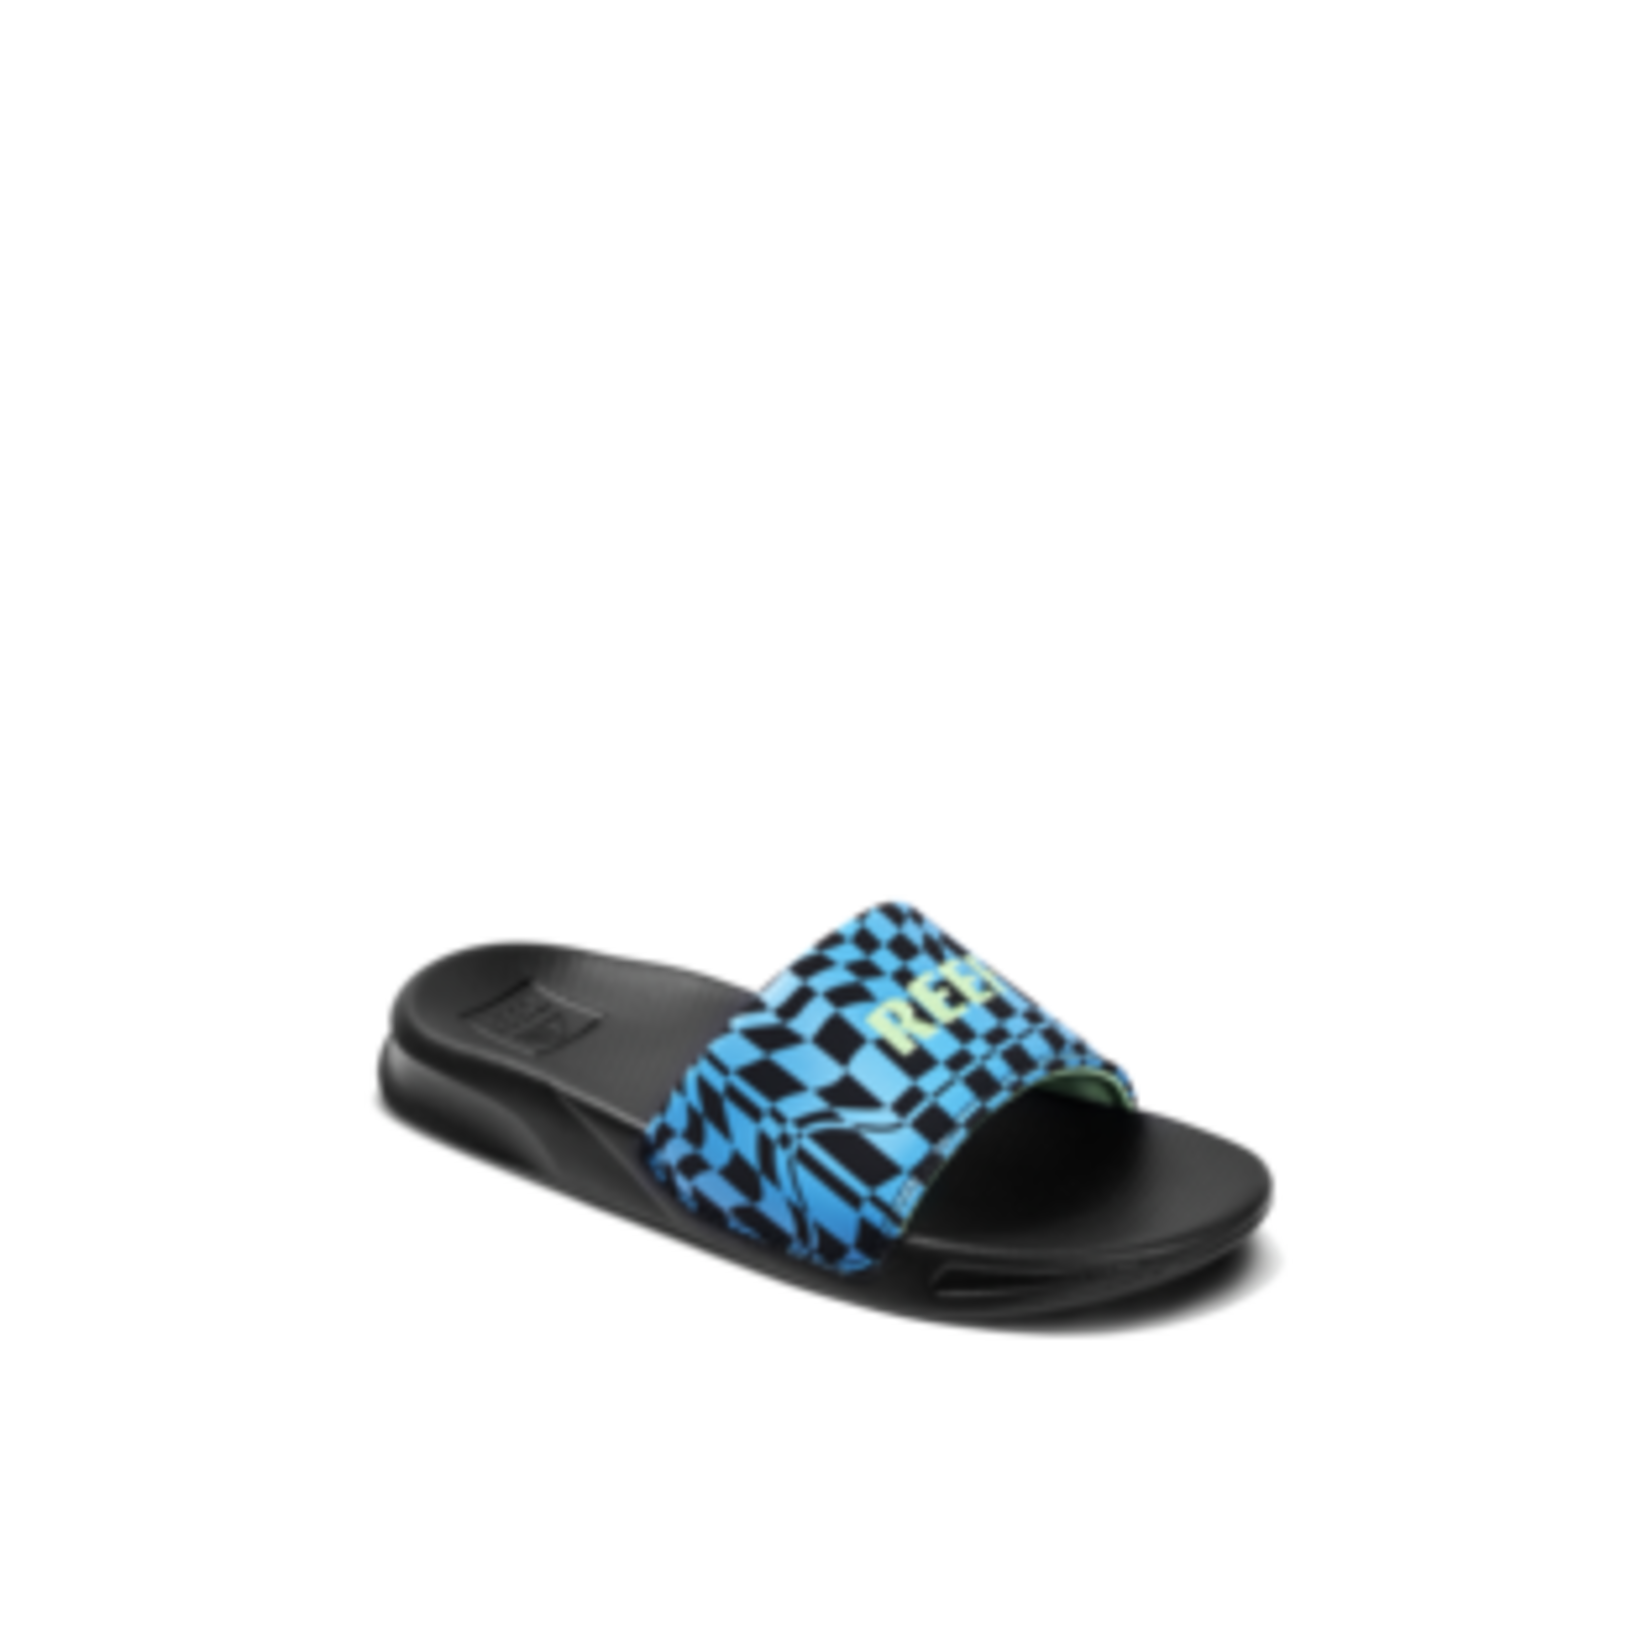 Reef Reef Sandals, Kids One Slide, Boys - Time-Out Sports Excellence